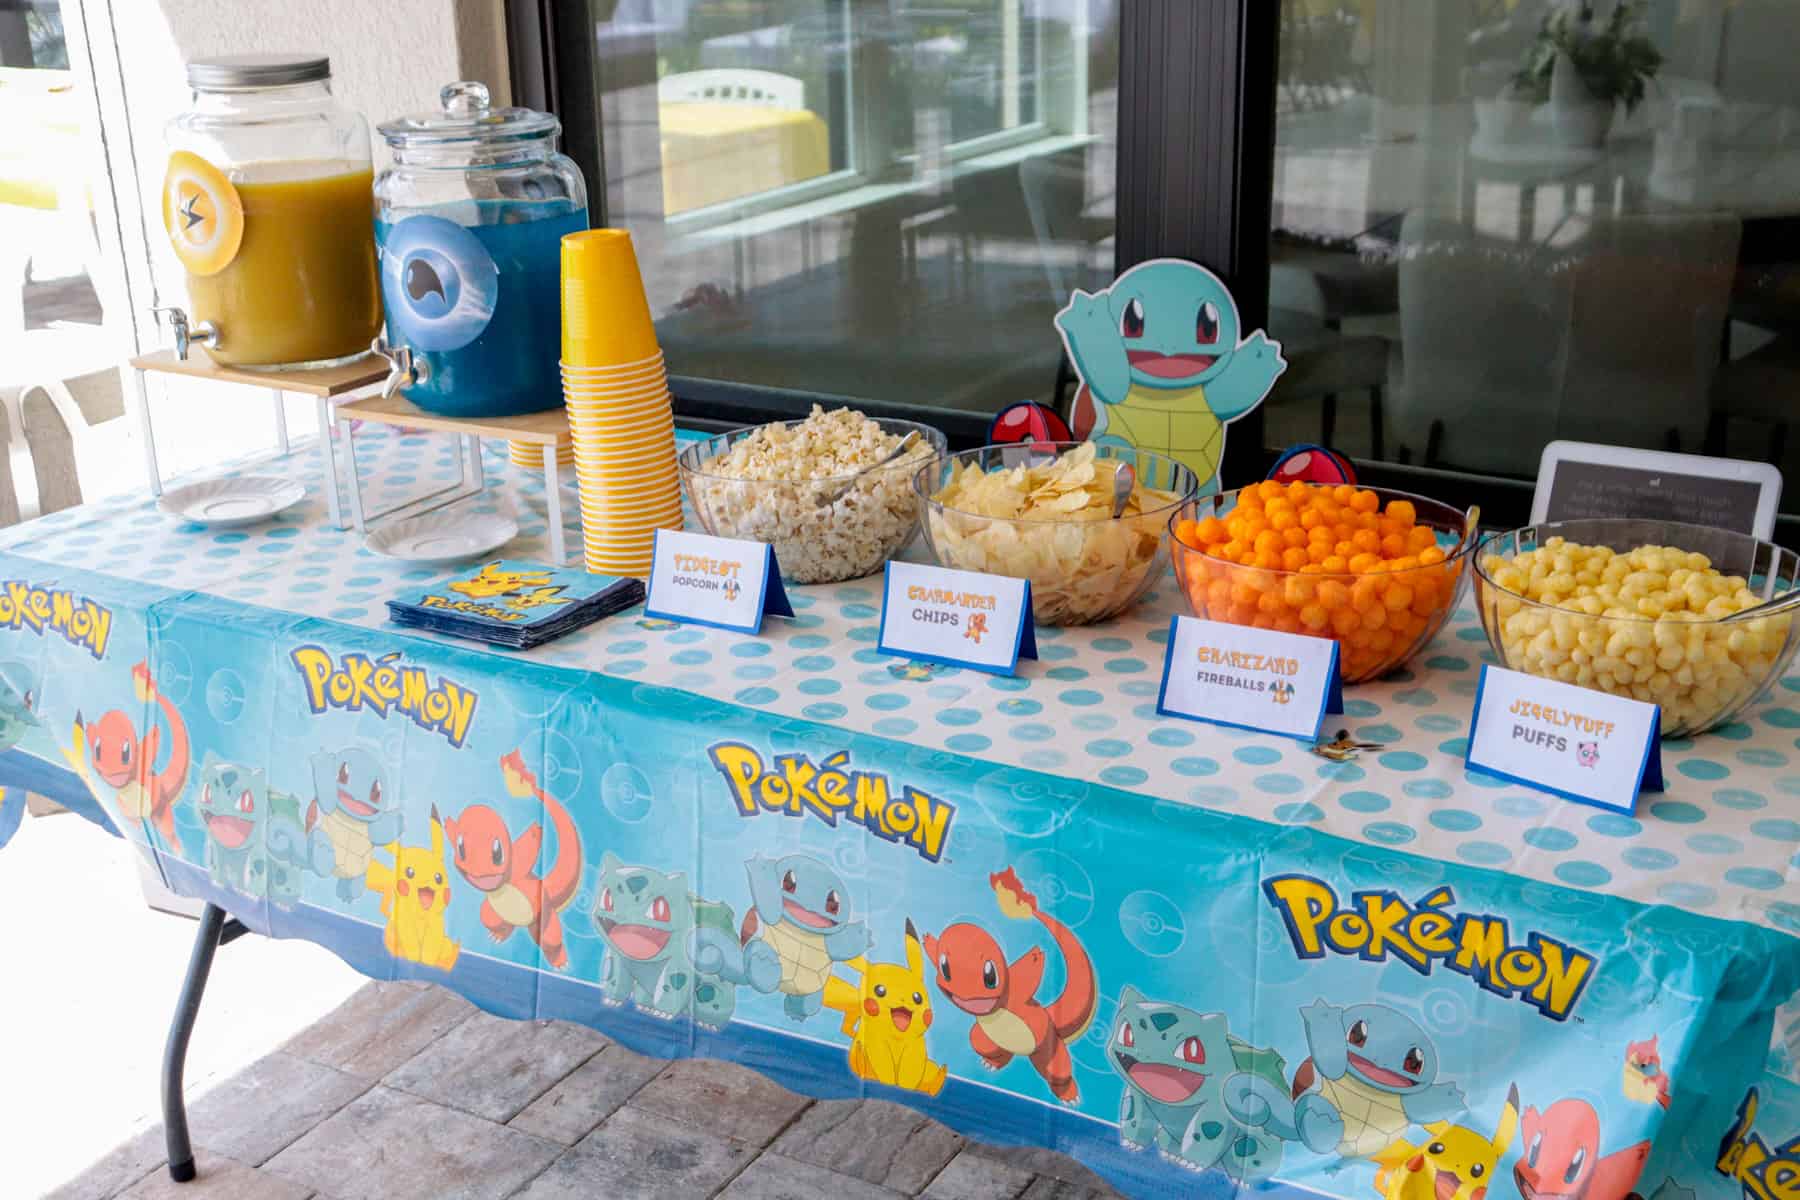 Pokemon party snack table with pokemon food labels.